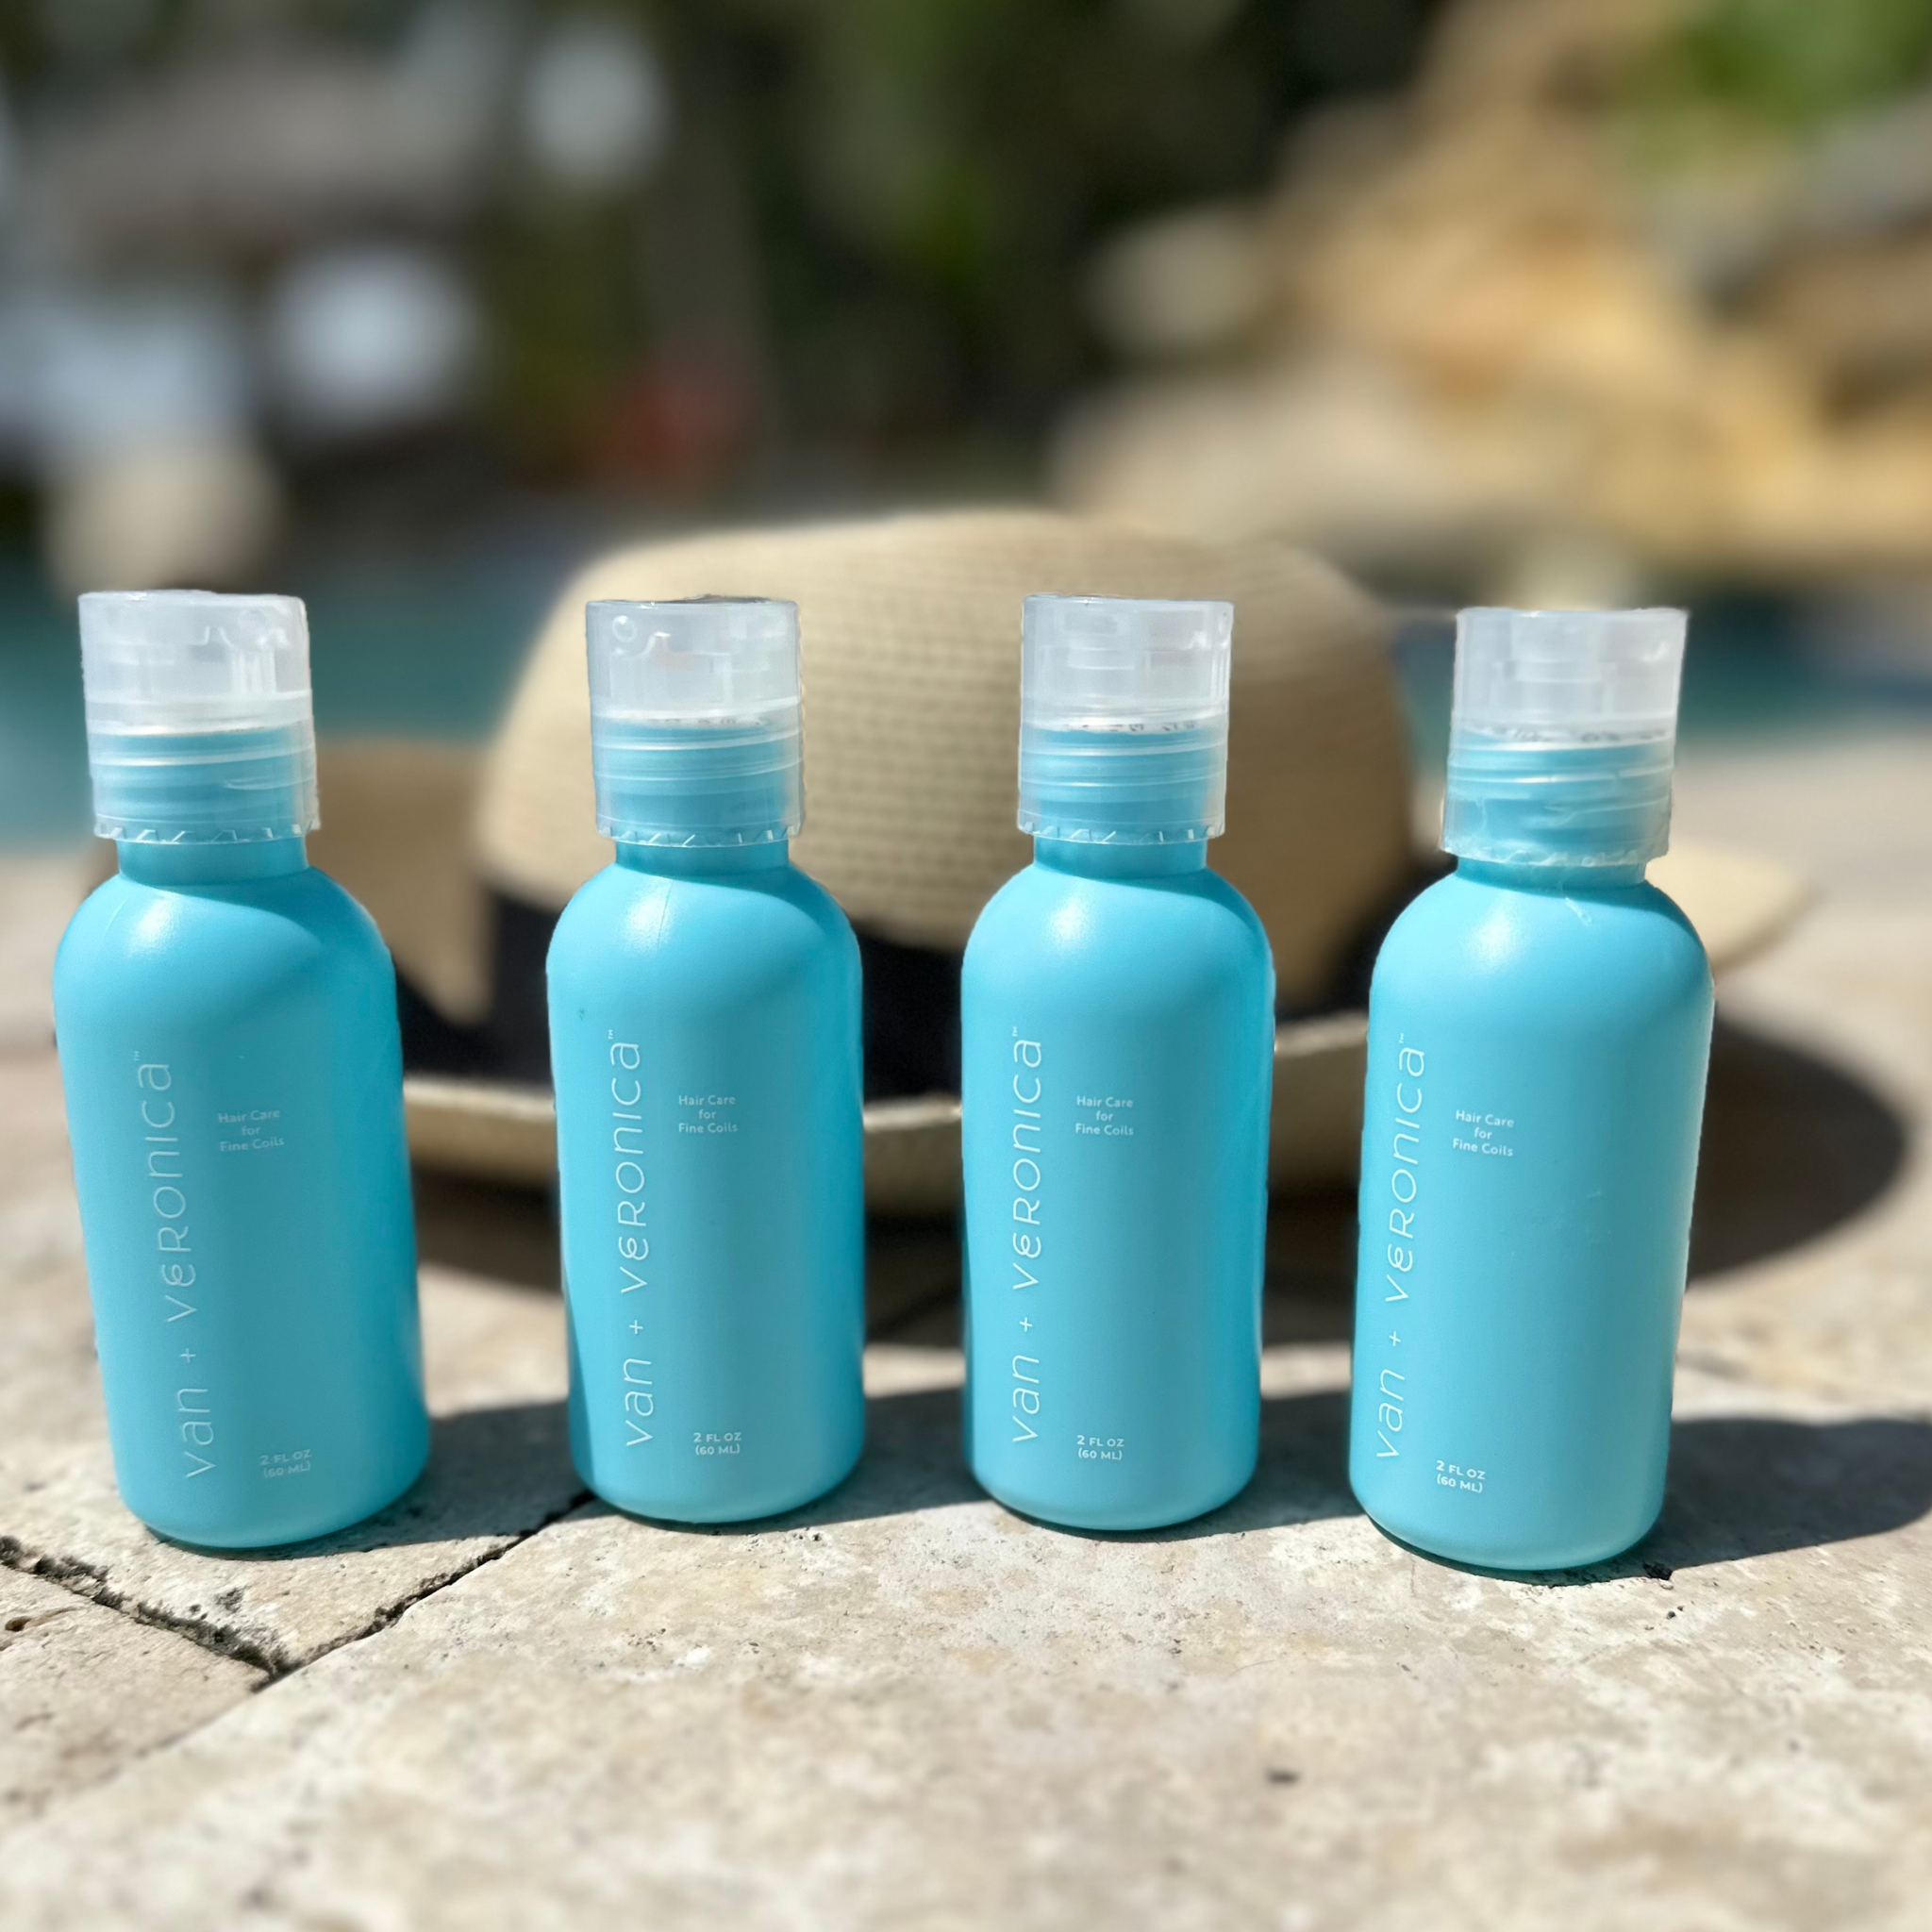 van + veronica Haircare for Fine Curly hair travel minis travel set